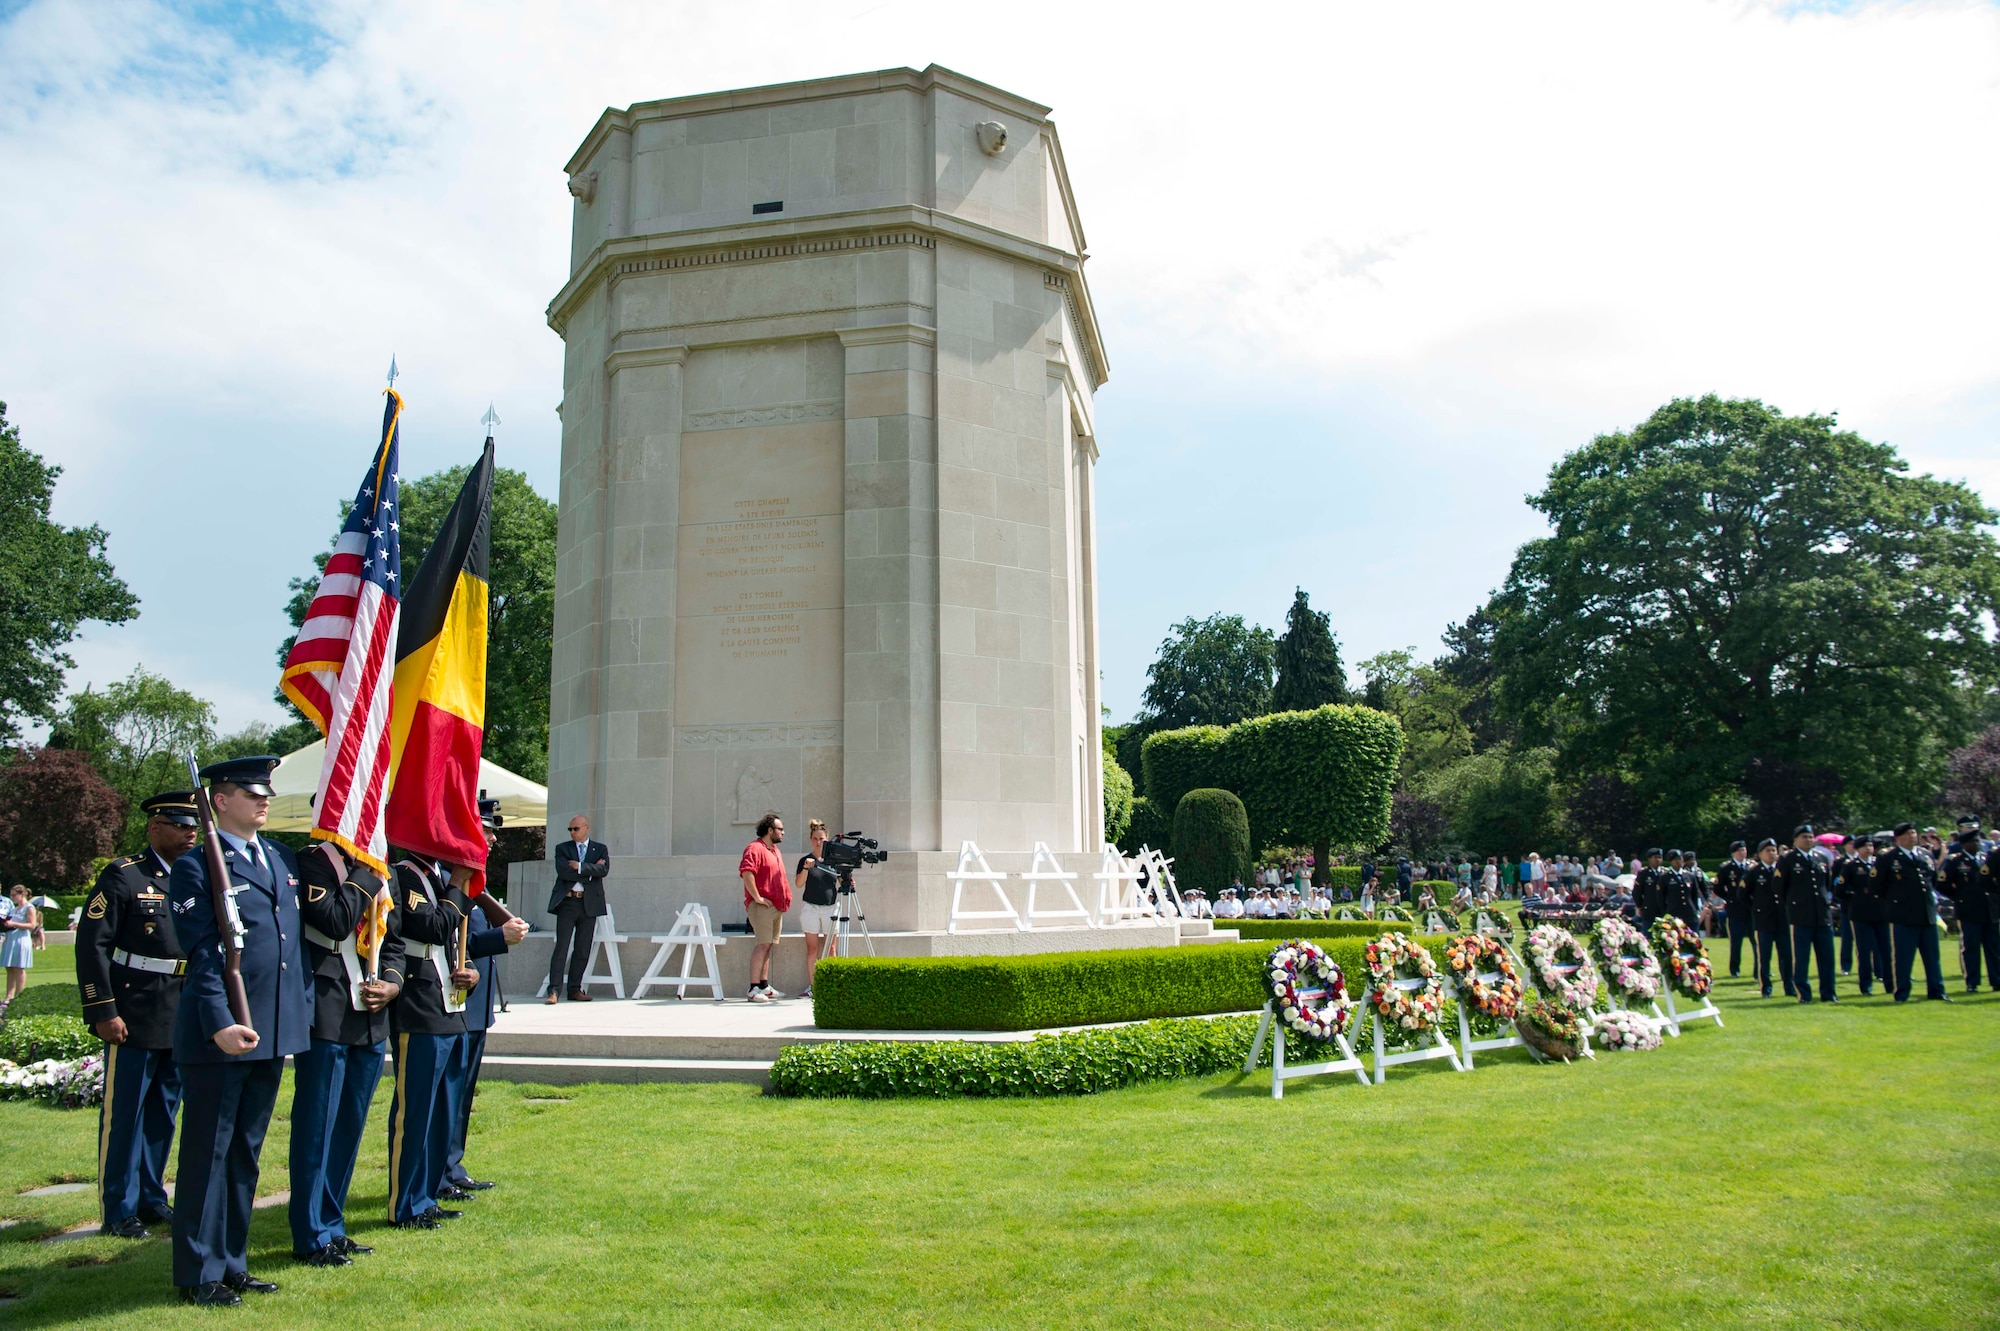 U.S. Soldiers and Airmen stand in honor formation during a Memorial Day ceremony at Flanders Field American Cemetery, Belgium, May 27, 2018.  At Flanders Field accounts for 368 grave sites and memorializes 43 missing in action, most of whom gave their lives in liberating Belgian soil in World War I. (U.S. Air Force photo by Senior Airman Elizabeth Baker)